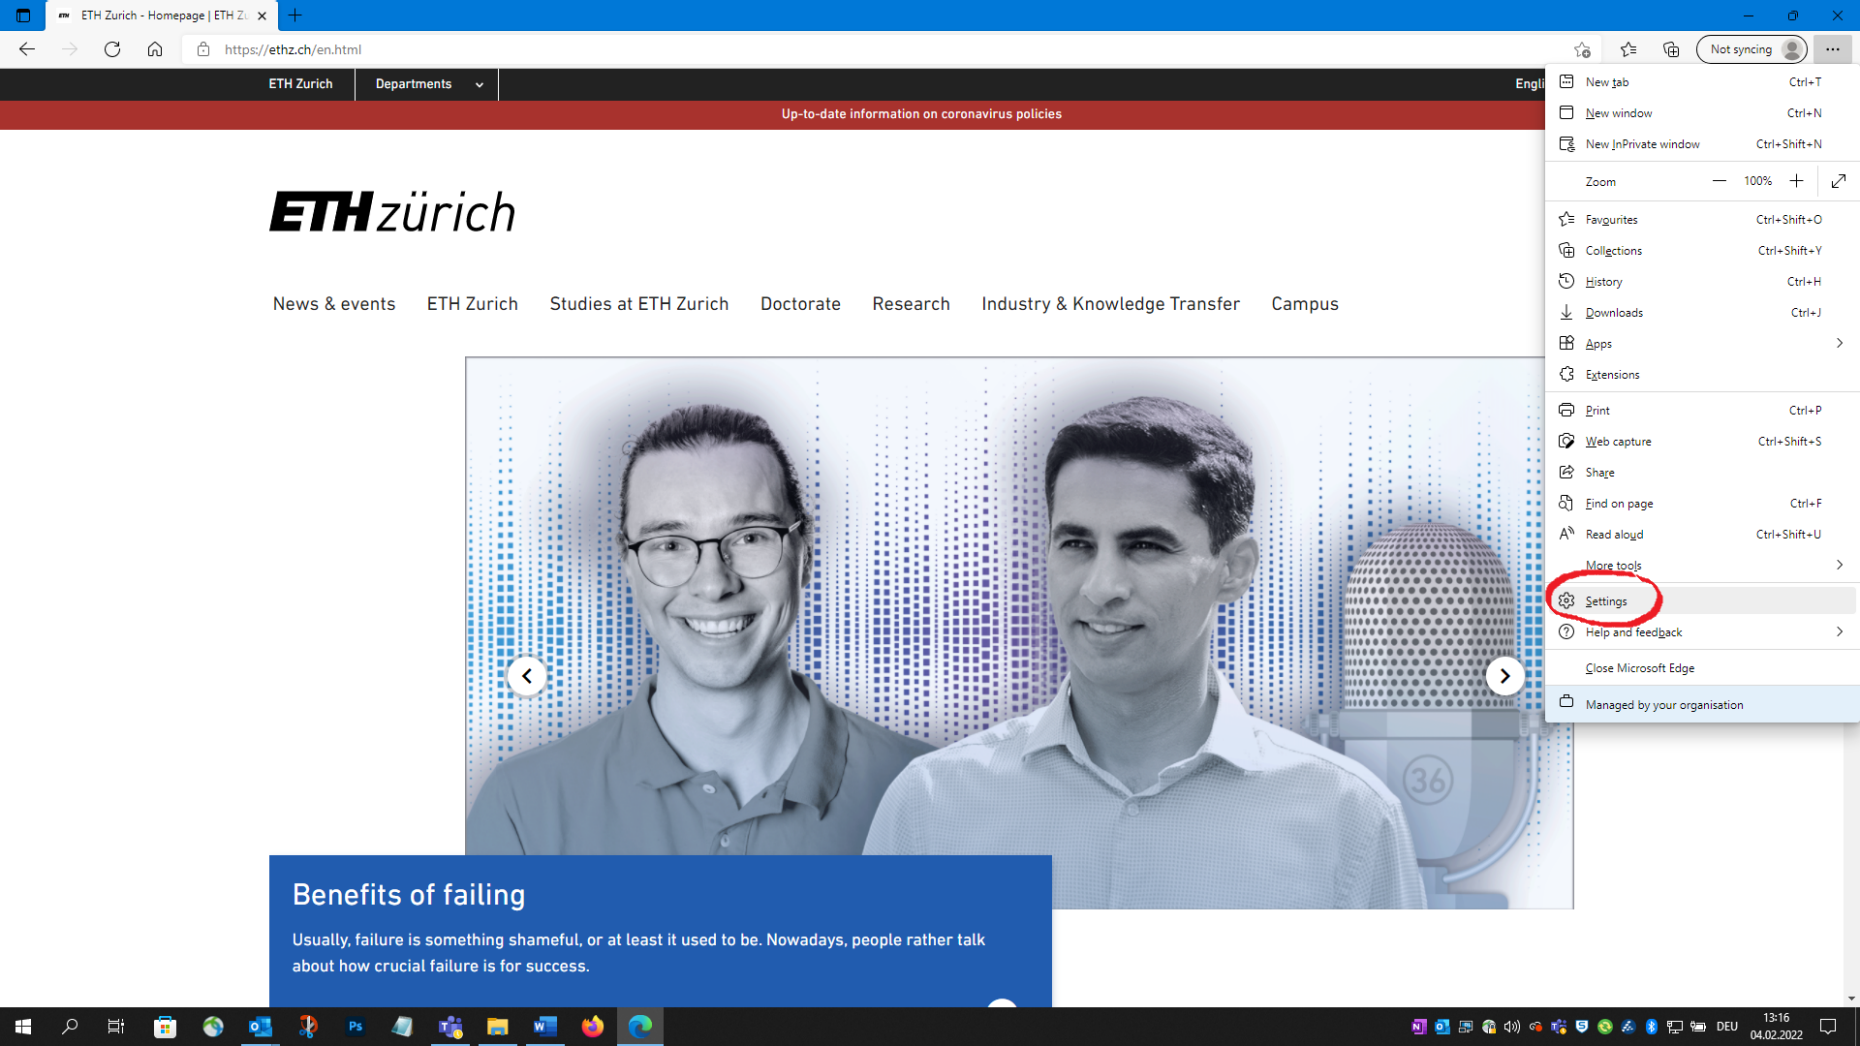 Enlarged view: View Microsoft Edge